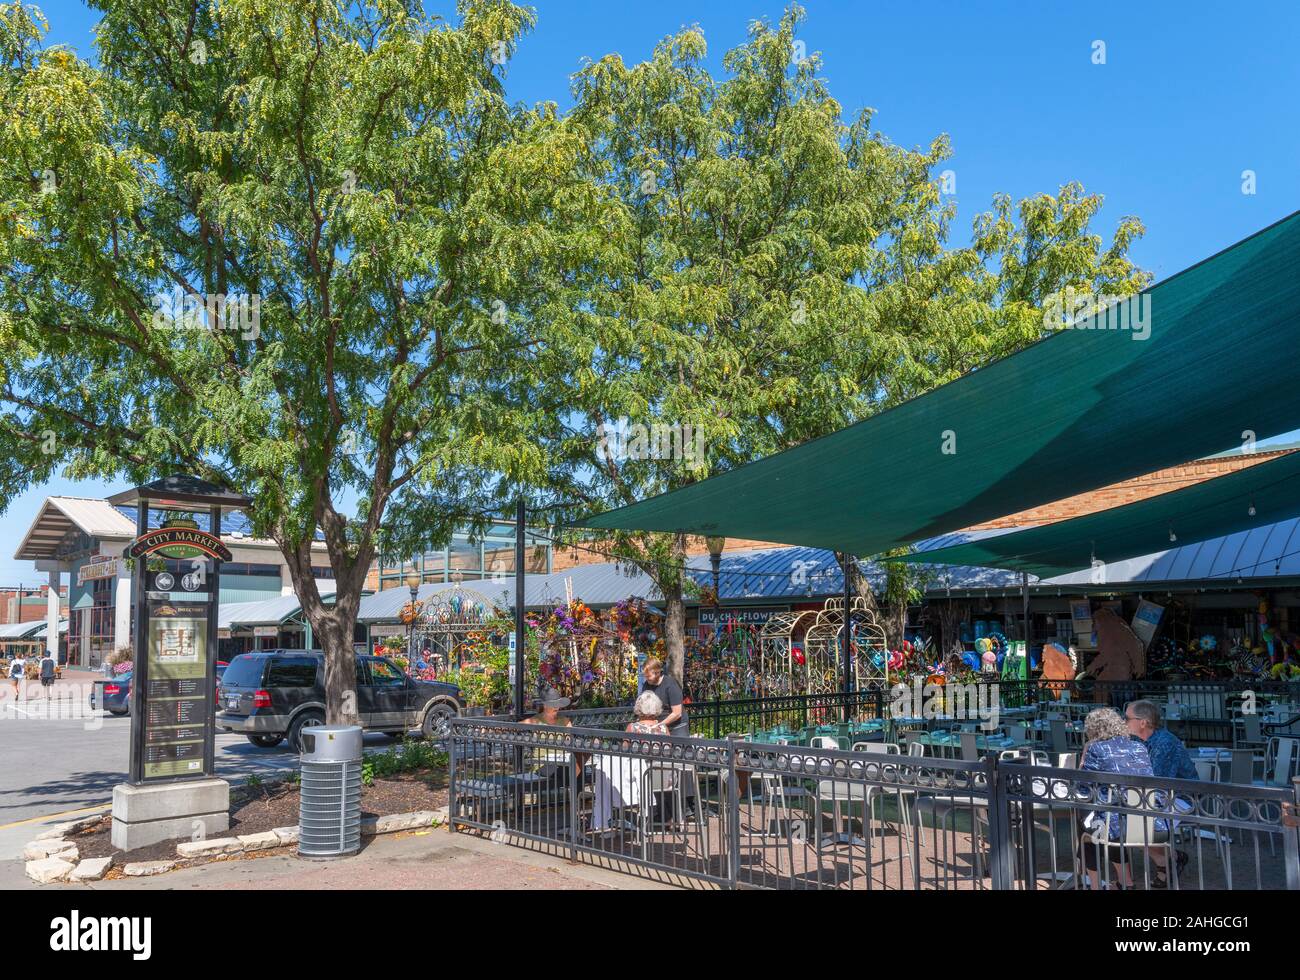 People sitting outside a cafe in the City Market, River Market district, Kansas City, Missouri, USA Stock Photo